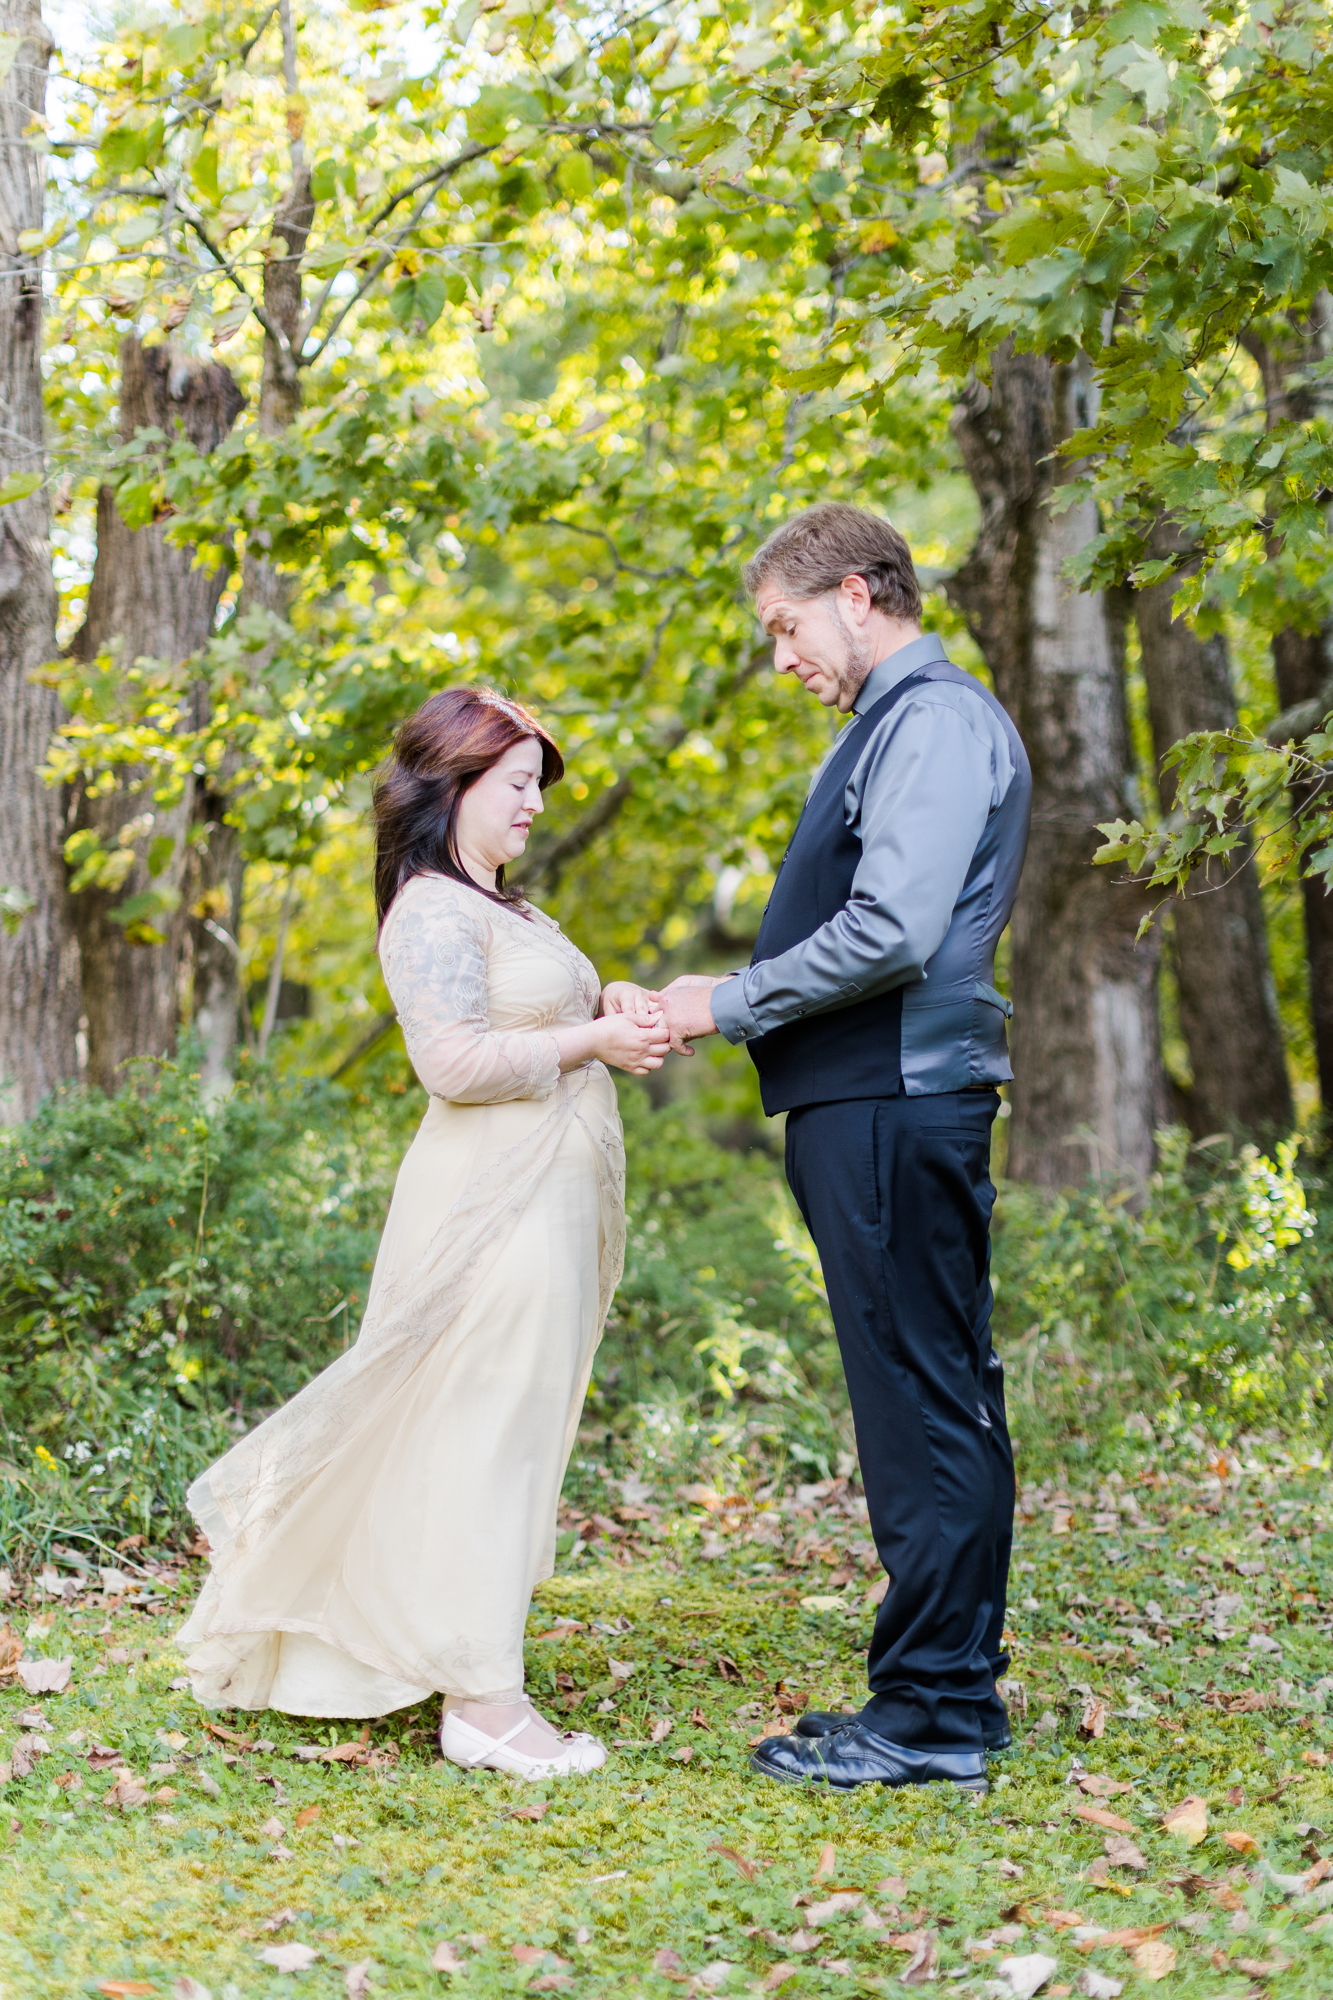 Candid Upstate New York Elopement Photos at Saugerties in Fall